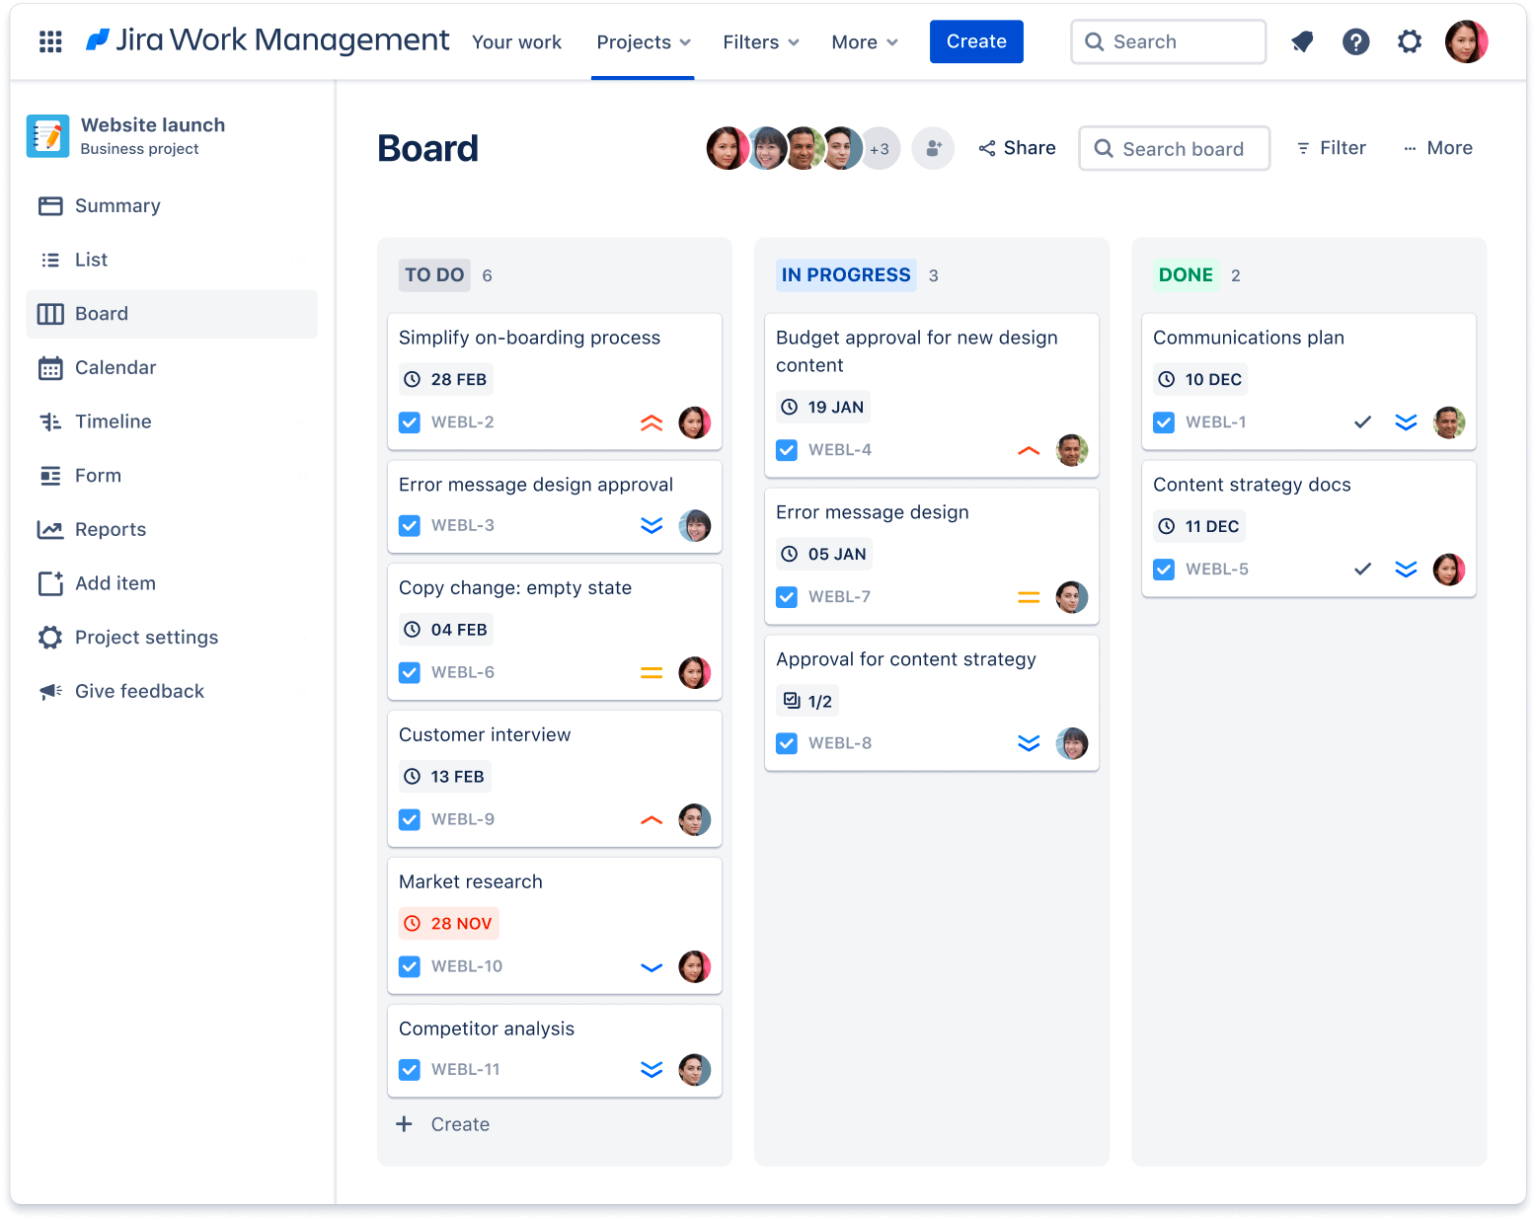 Remote Work and Distributed Teams: 4 Insights into the Future of Flexible Work - Jira